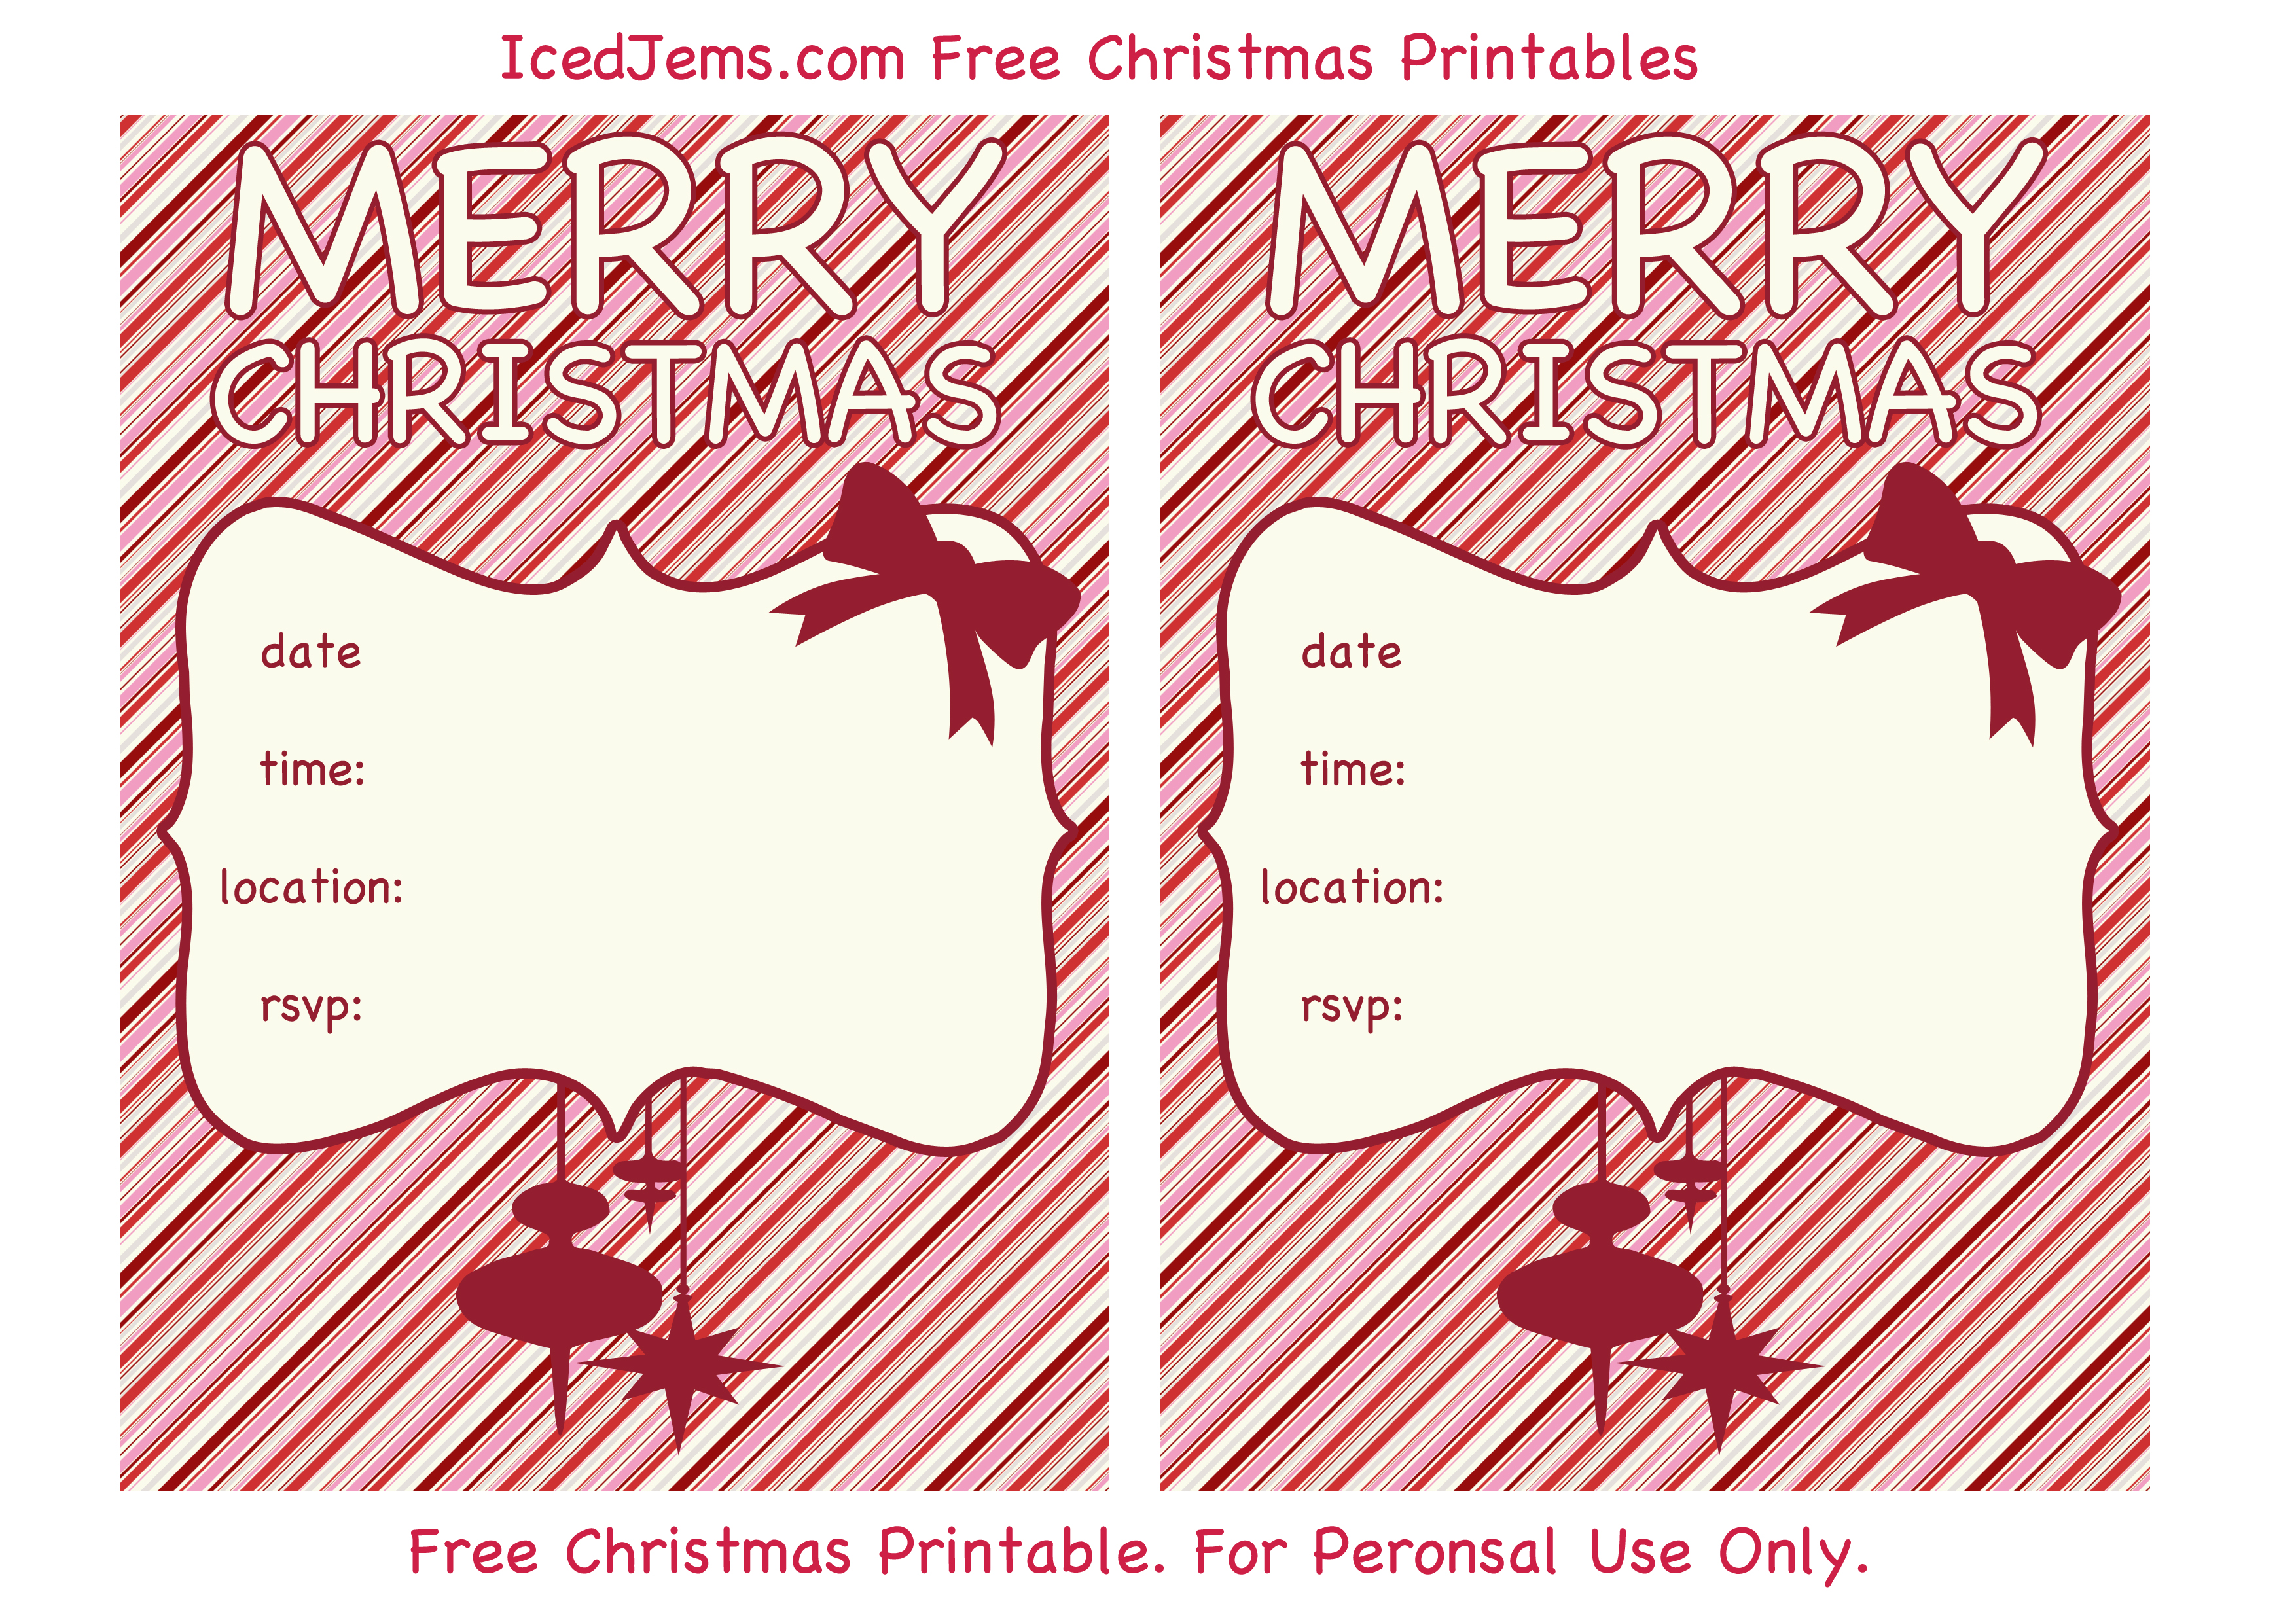 free-christmas-party-printables-iced-jems